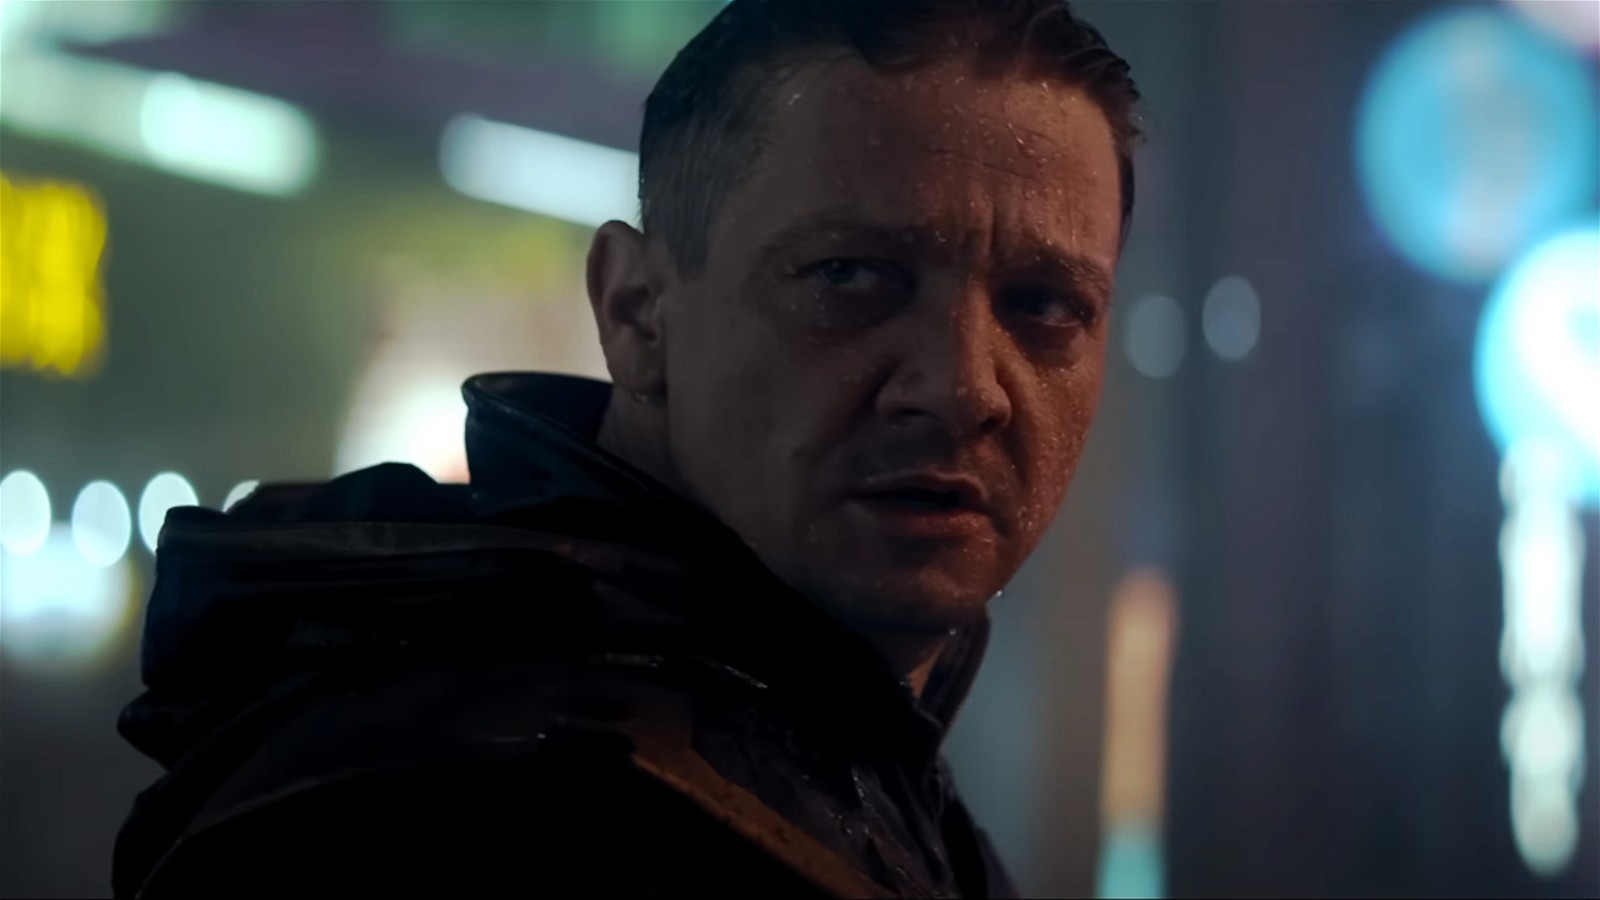 “Just getting back in my routine”: Jeremy Renner Hints His Marvel Return With Super Bowl Ad After Near-Fatal Snowplow Injury